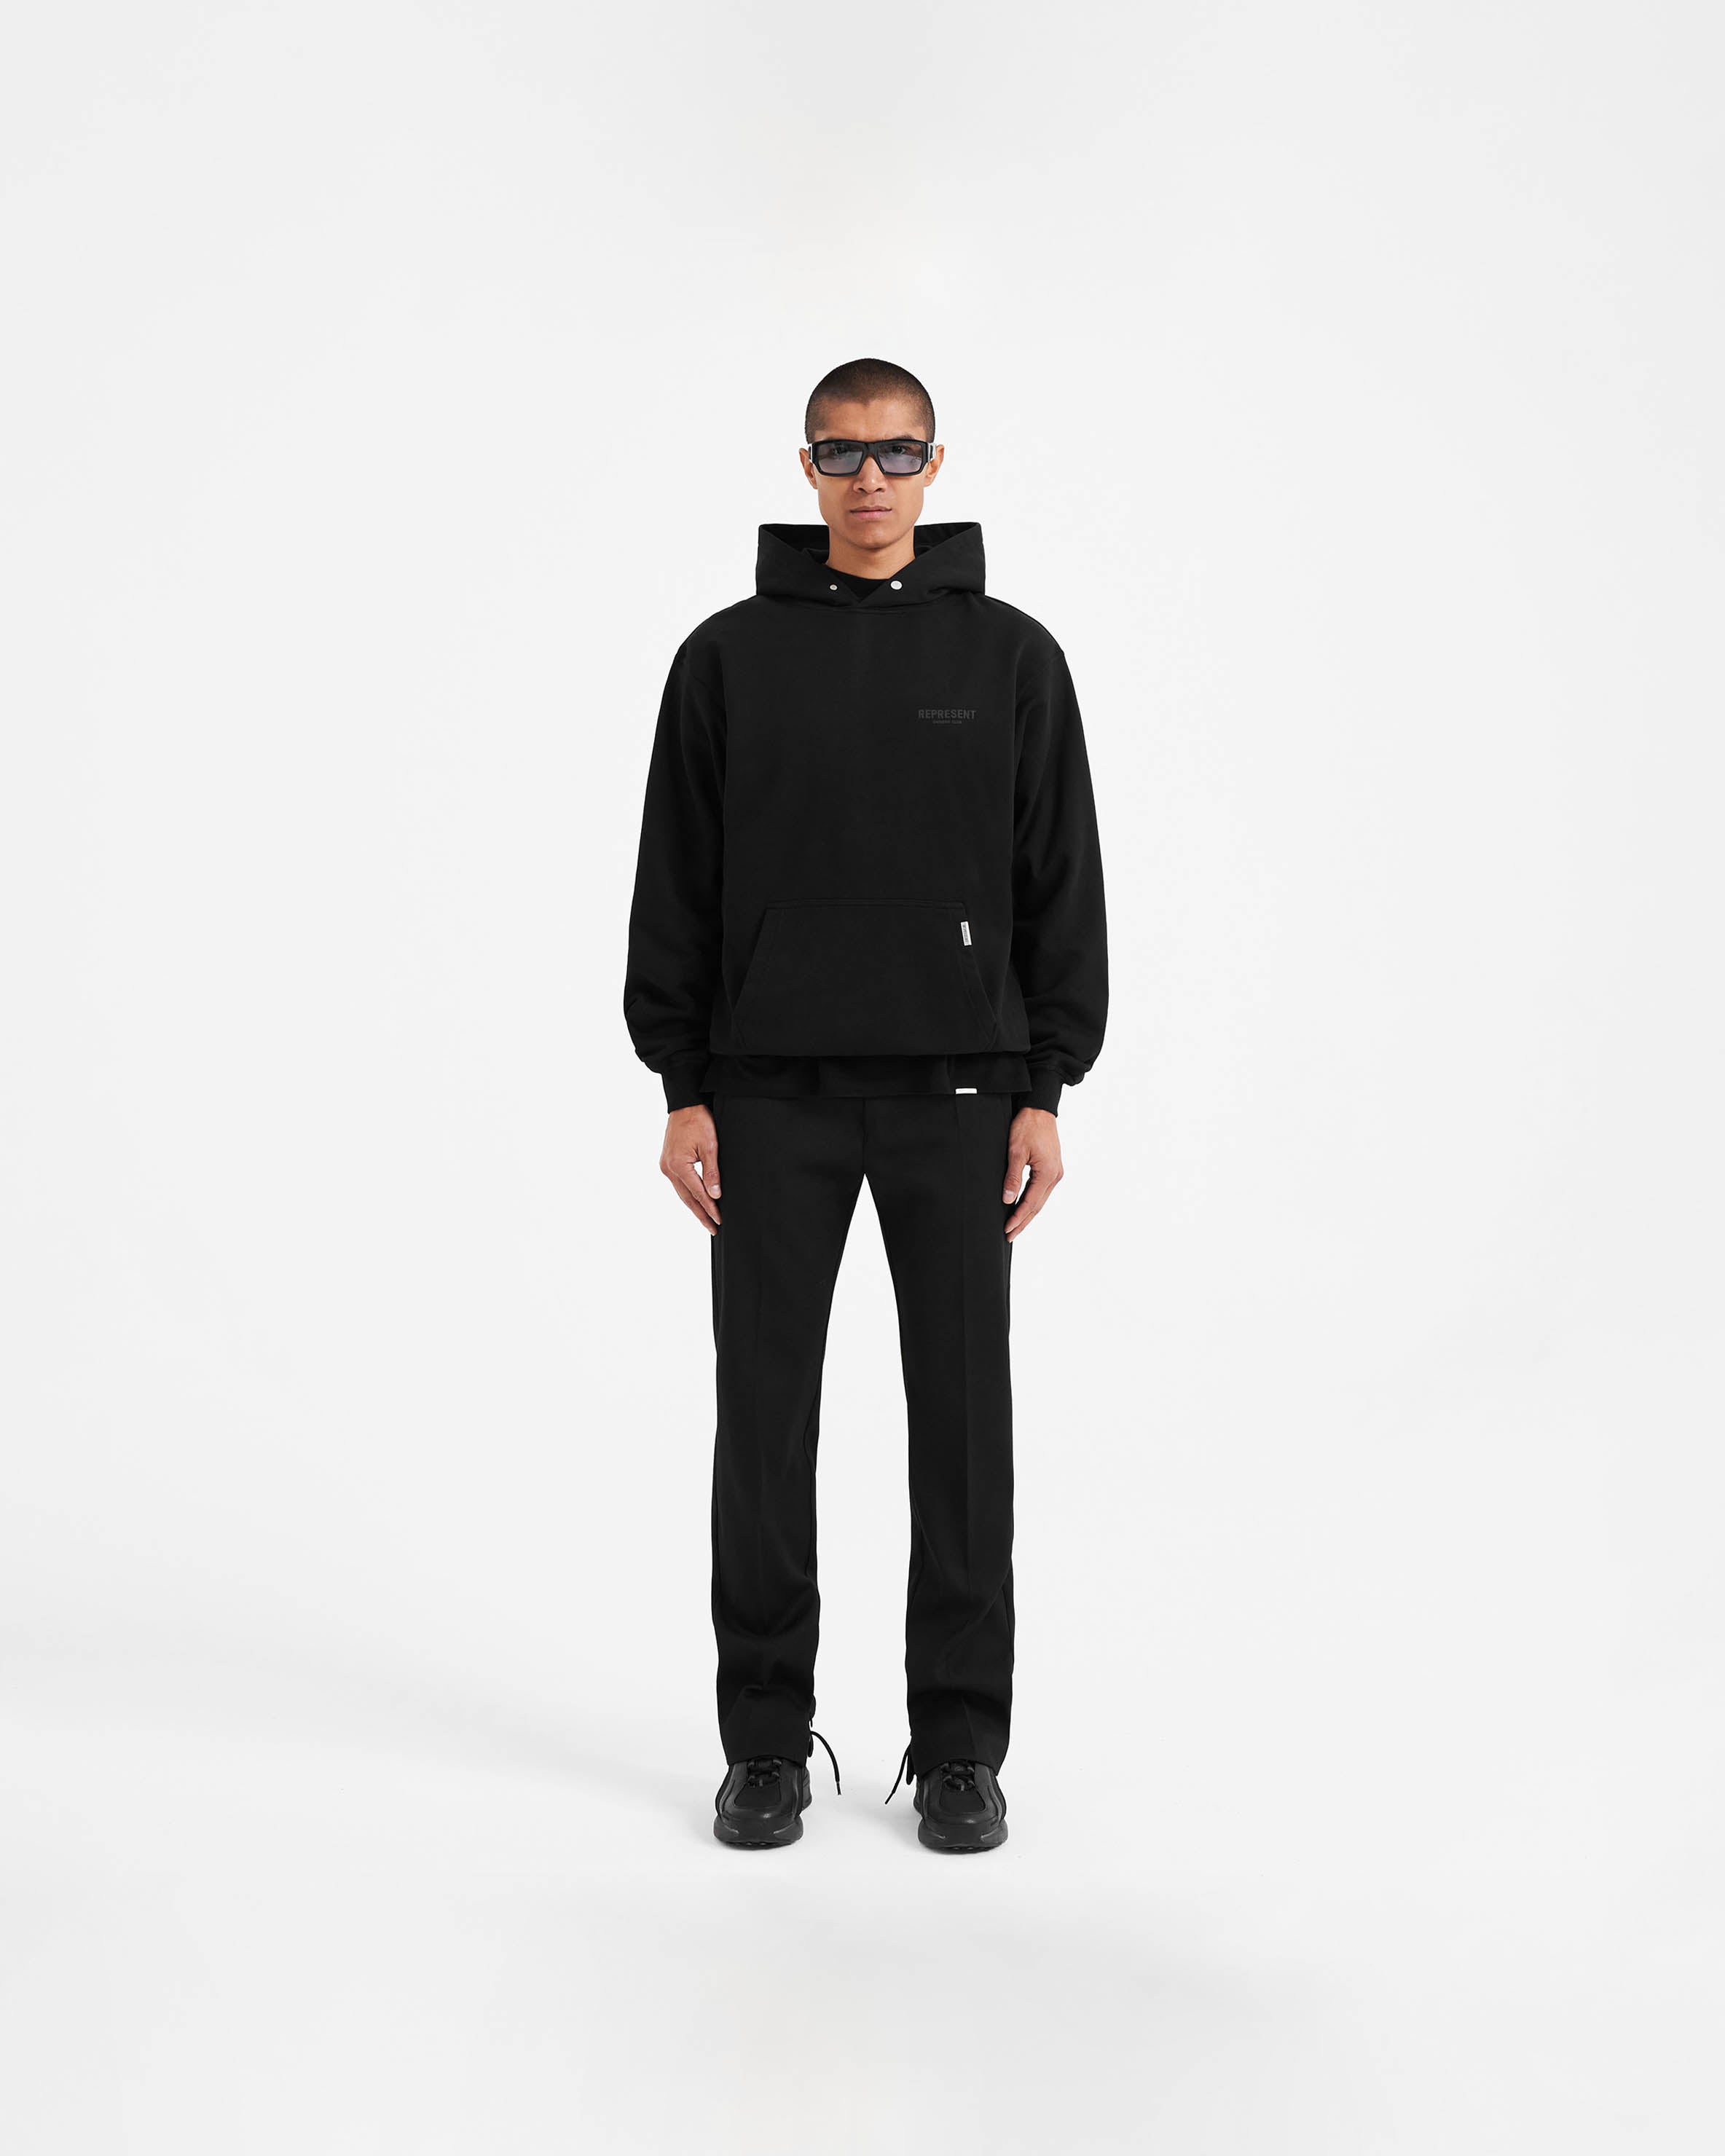 Represent Owners Club Hoodie - Black Reflective